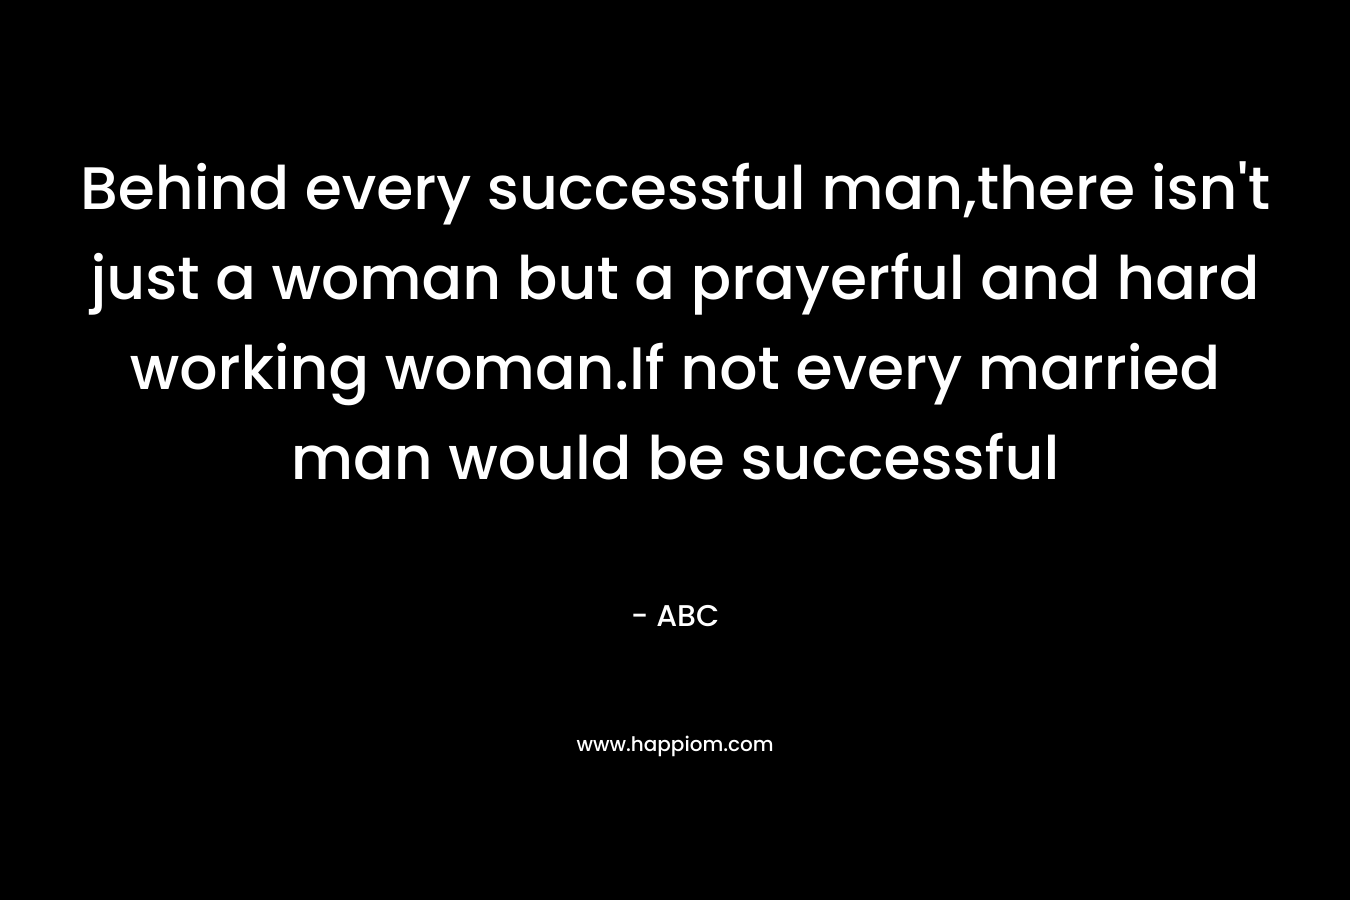 Behind every successful man,there isn't just a woman but a prayerful and hard working woman.If not every married man would be successful